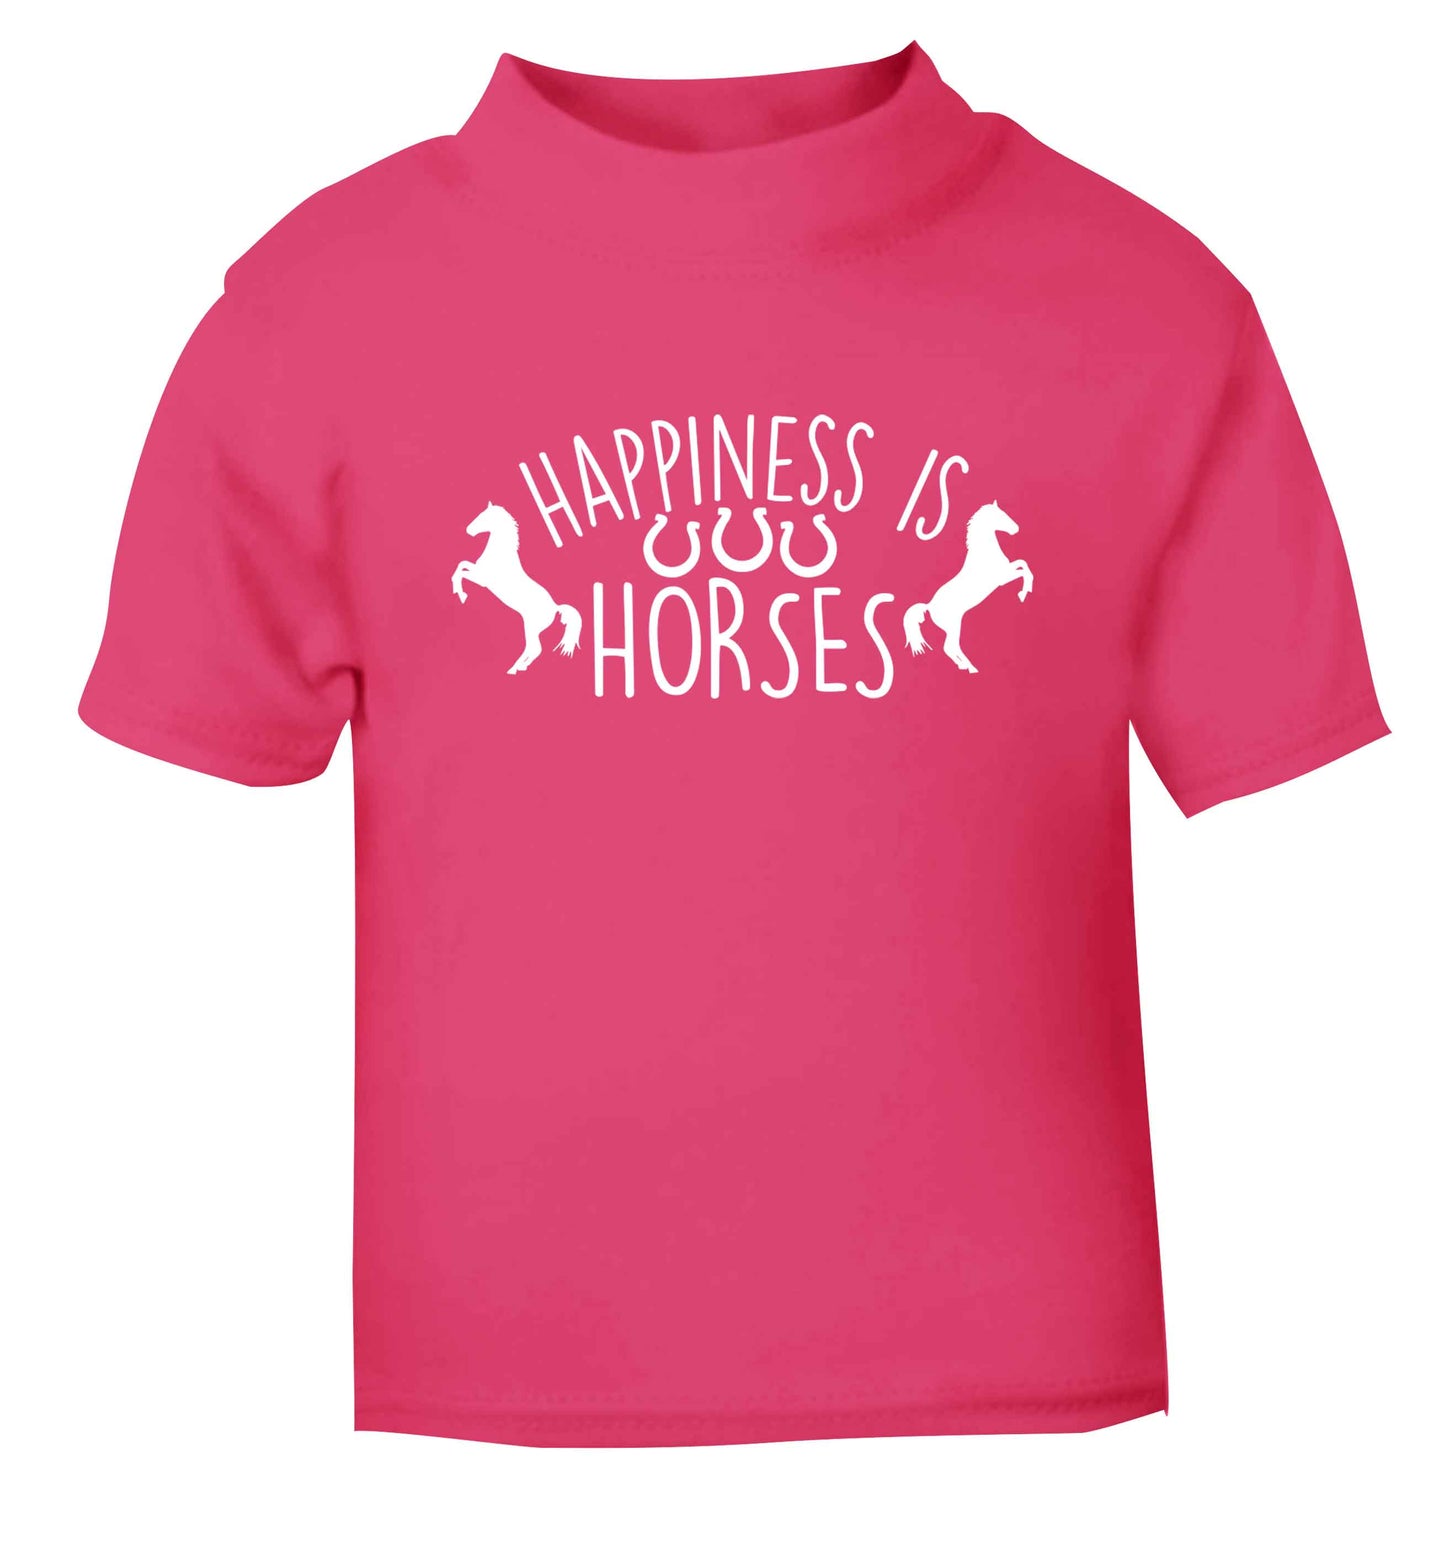 Happiness is horses pink baby toddler Tshirt 2 Years